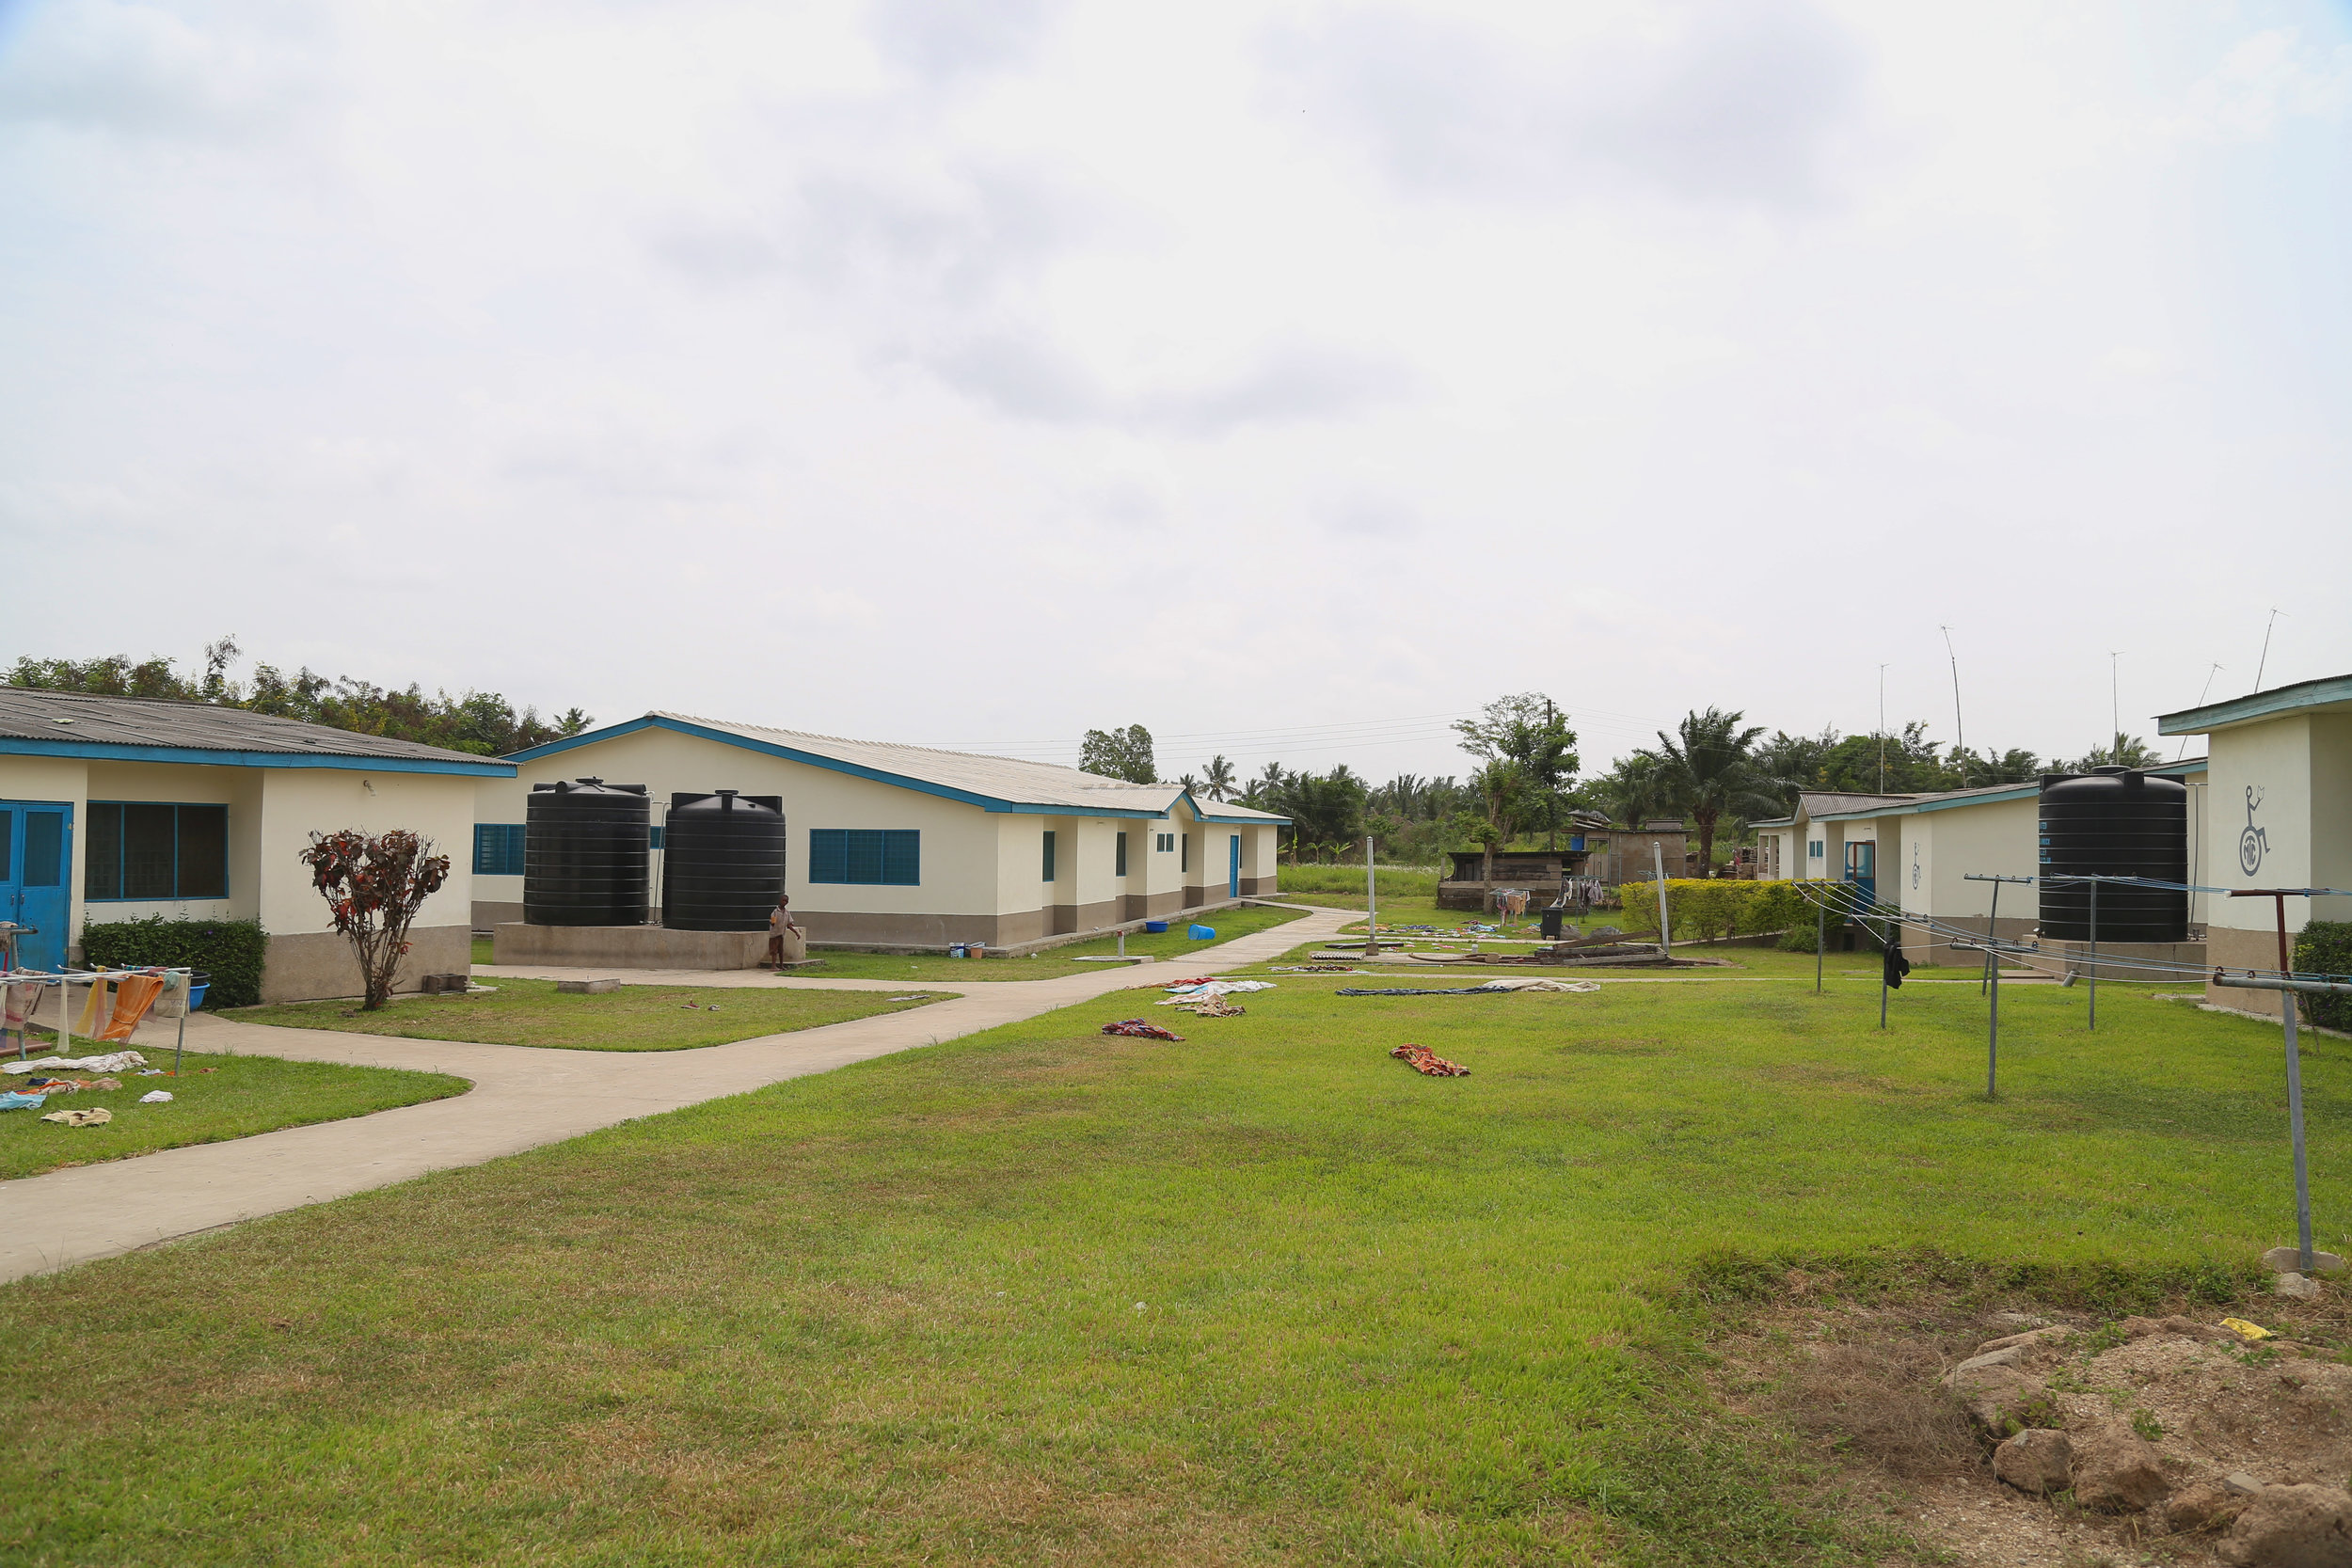 Our dormitory and vocational skills building.